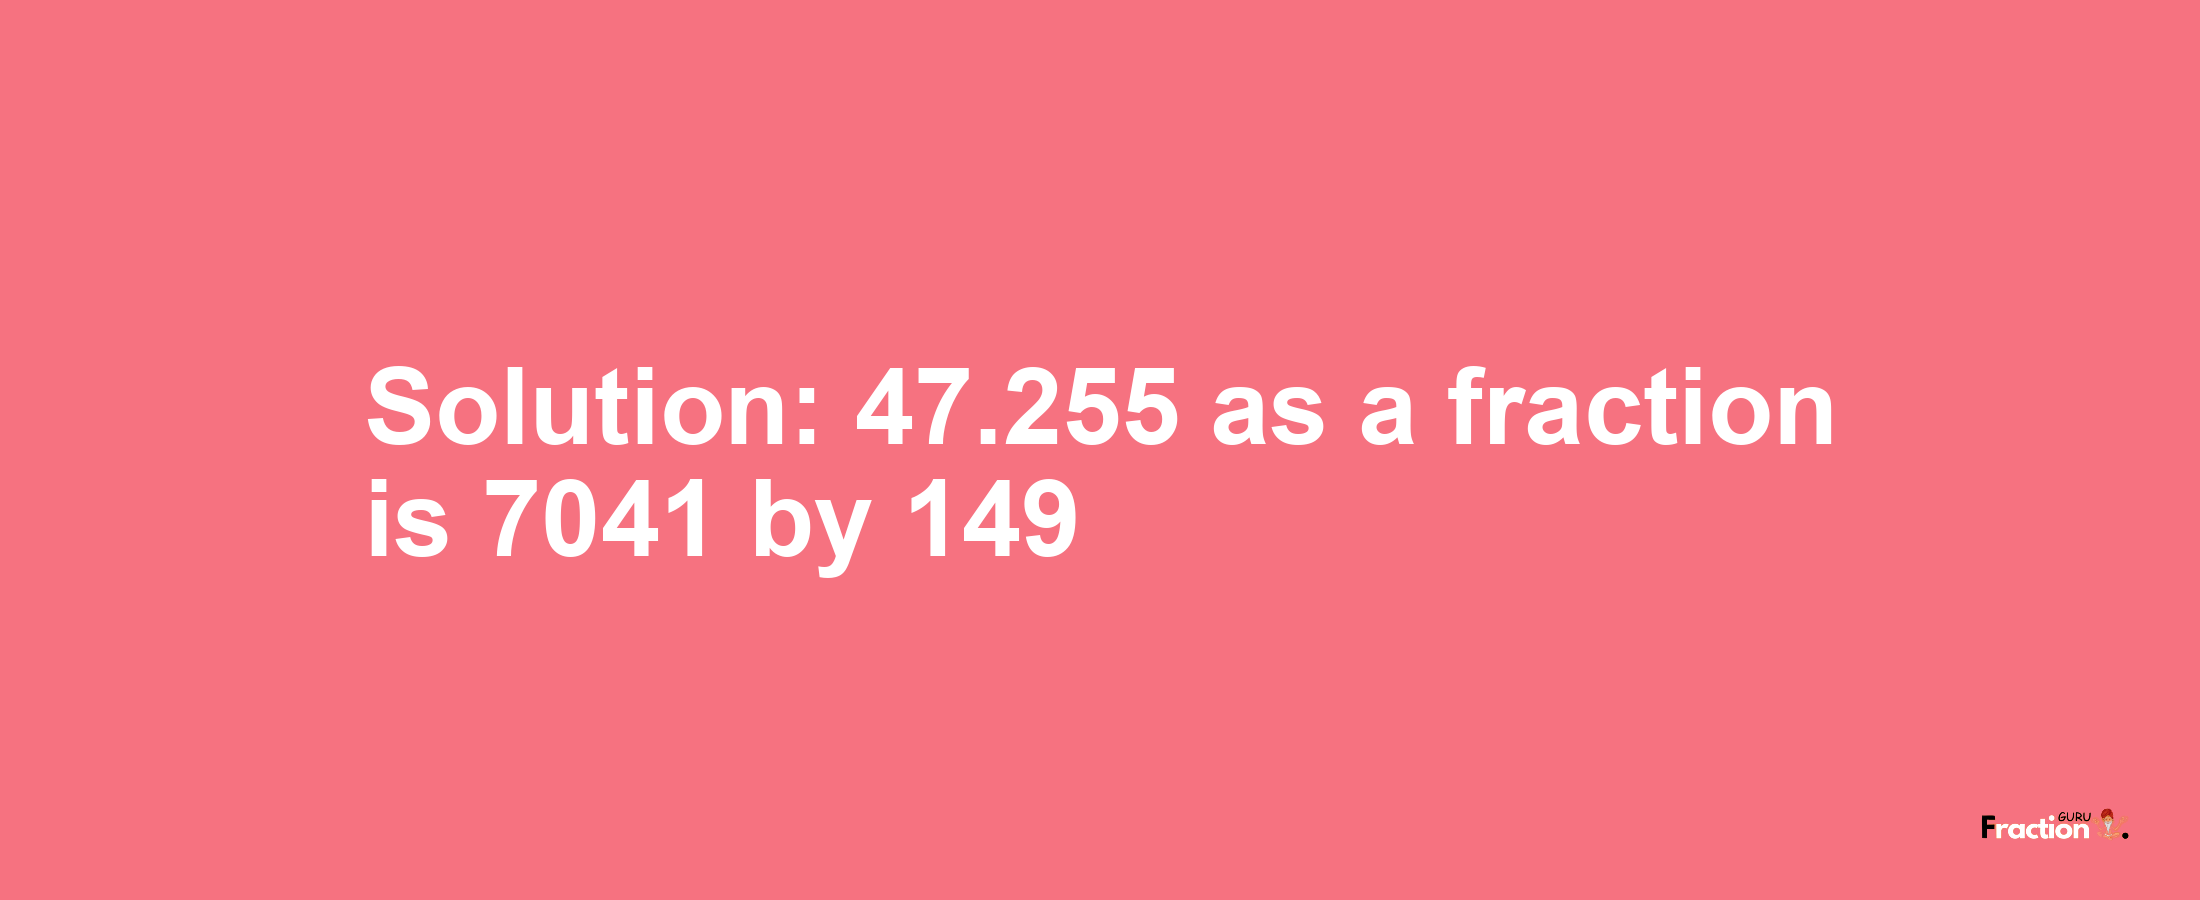 Solution:47.255 as a fraction is 7041/149